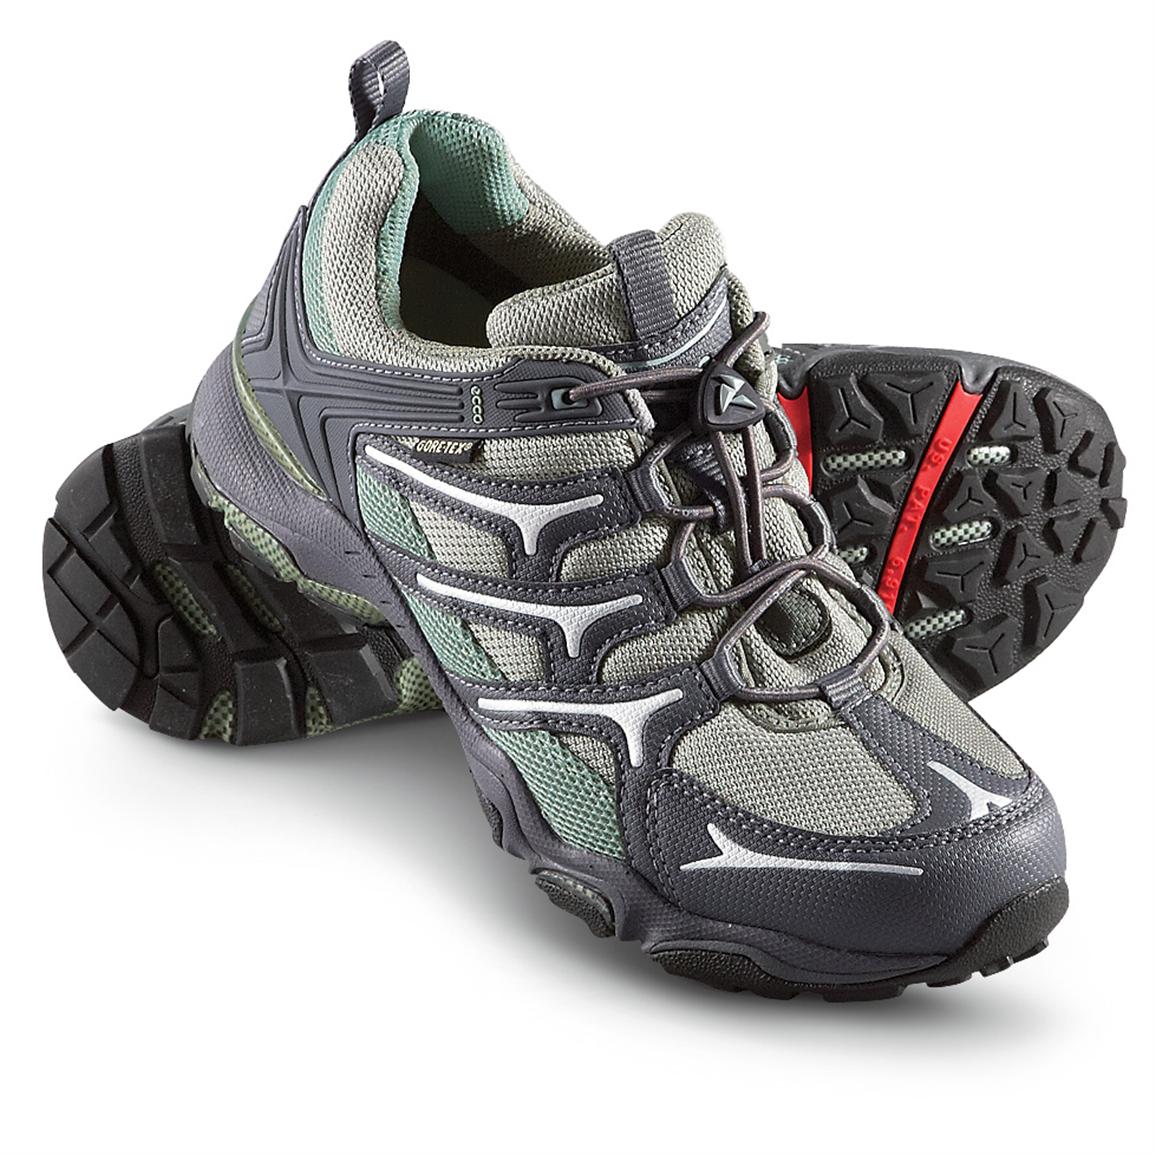 verwerken Toerist output Women's Ecco® Fast Trail GORE - TEX® Trail Shoes, Titanium / Ice Flower -  232421, Running Shoes & Sneakers at Sportsman's Guide